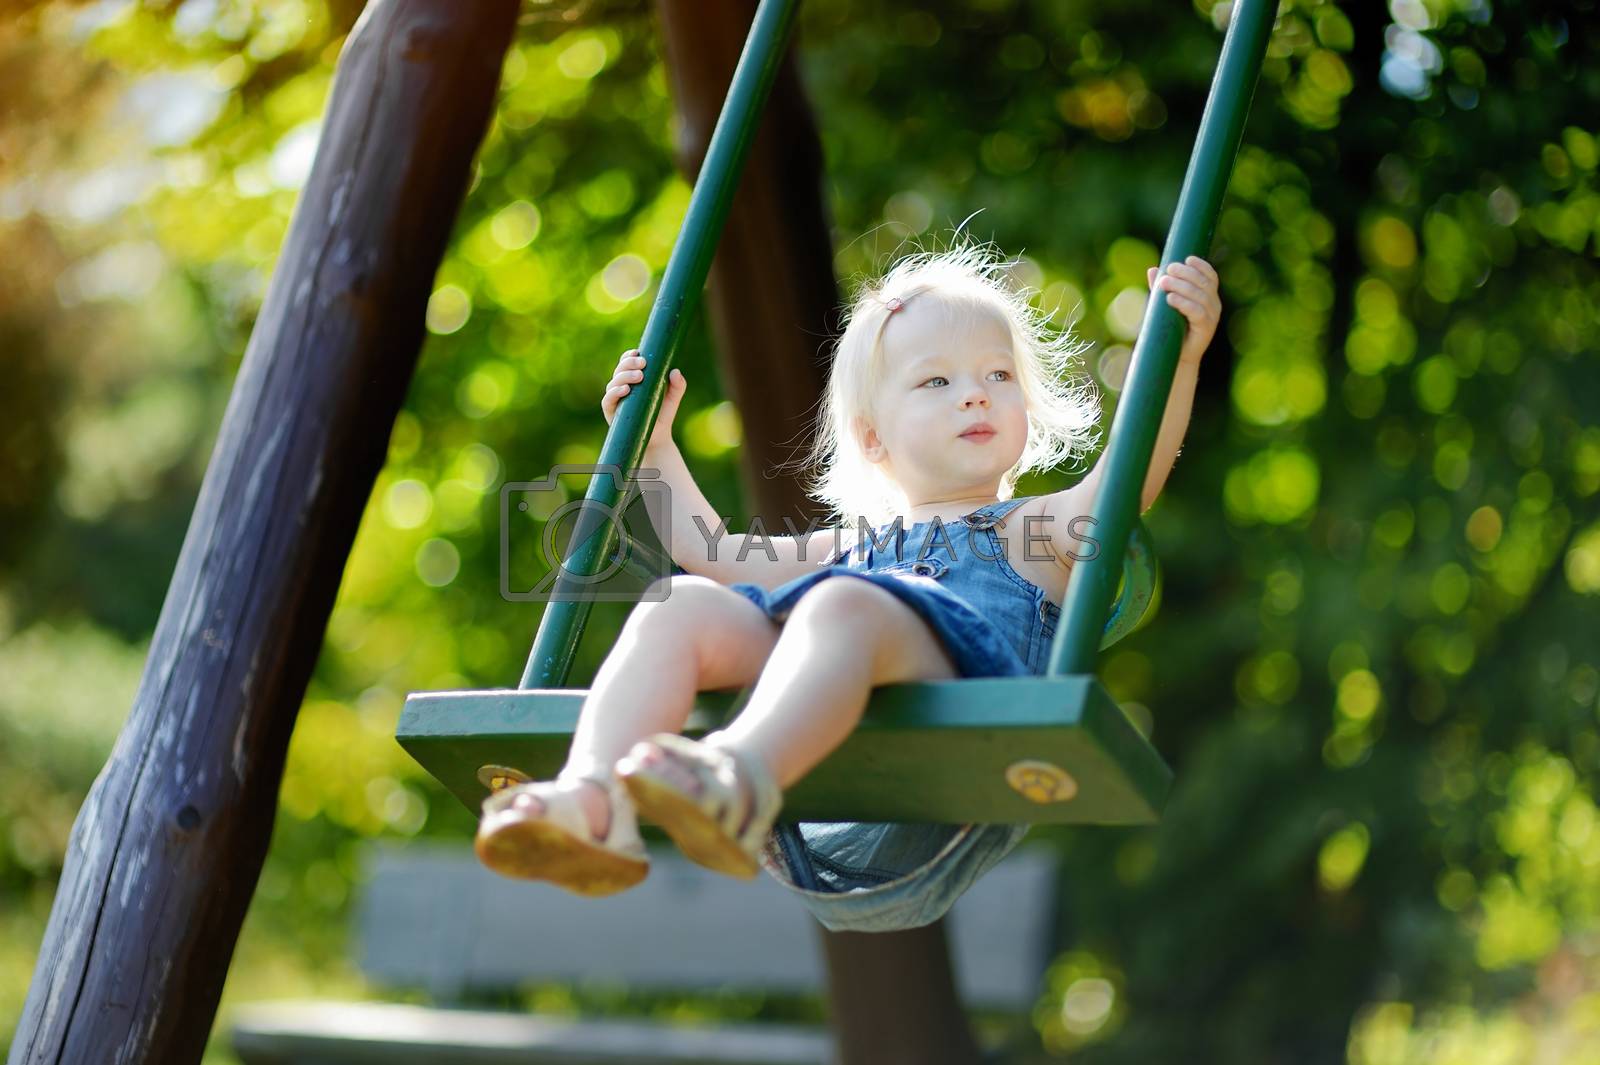 Royalty free image of Adorable girl having fun on a swing by maximkabb